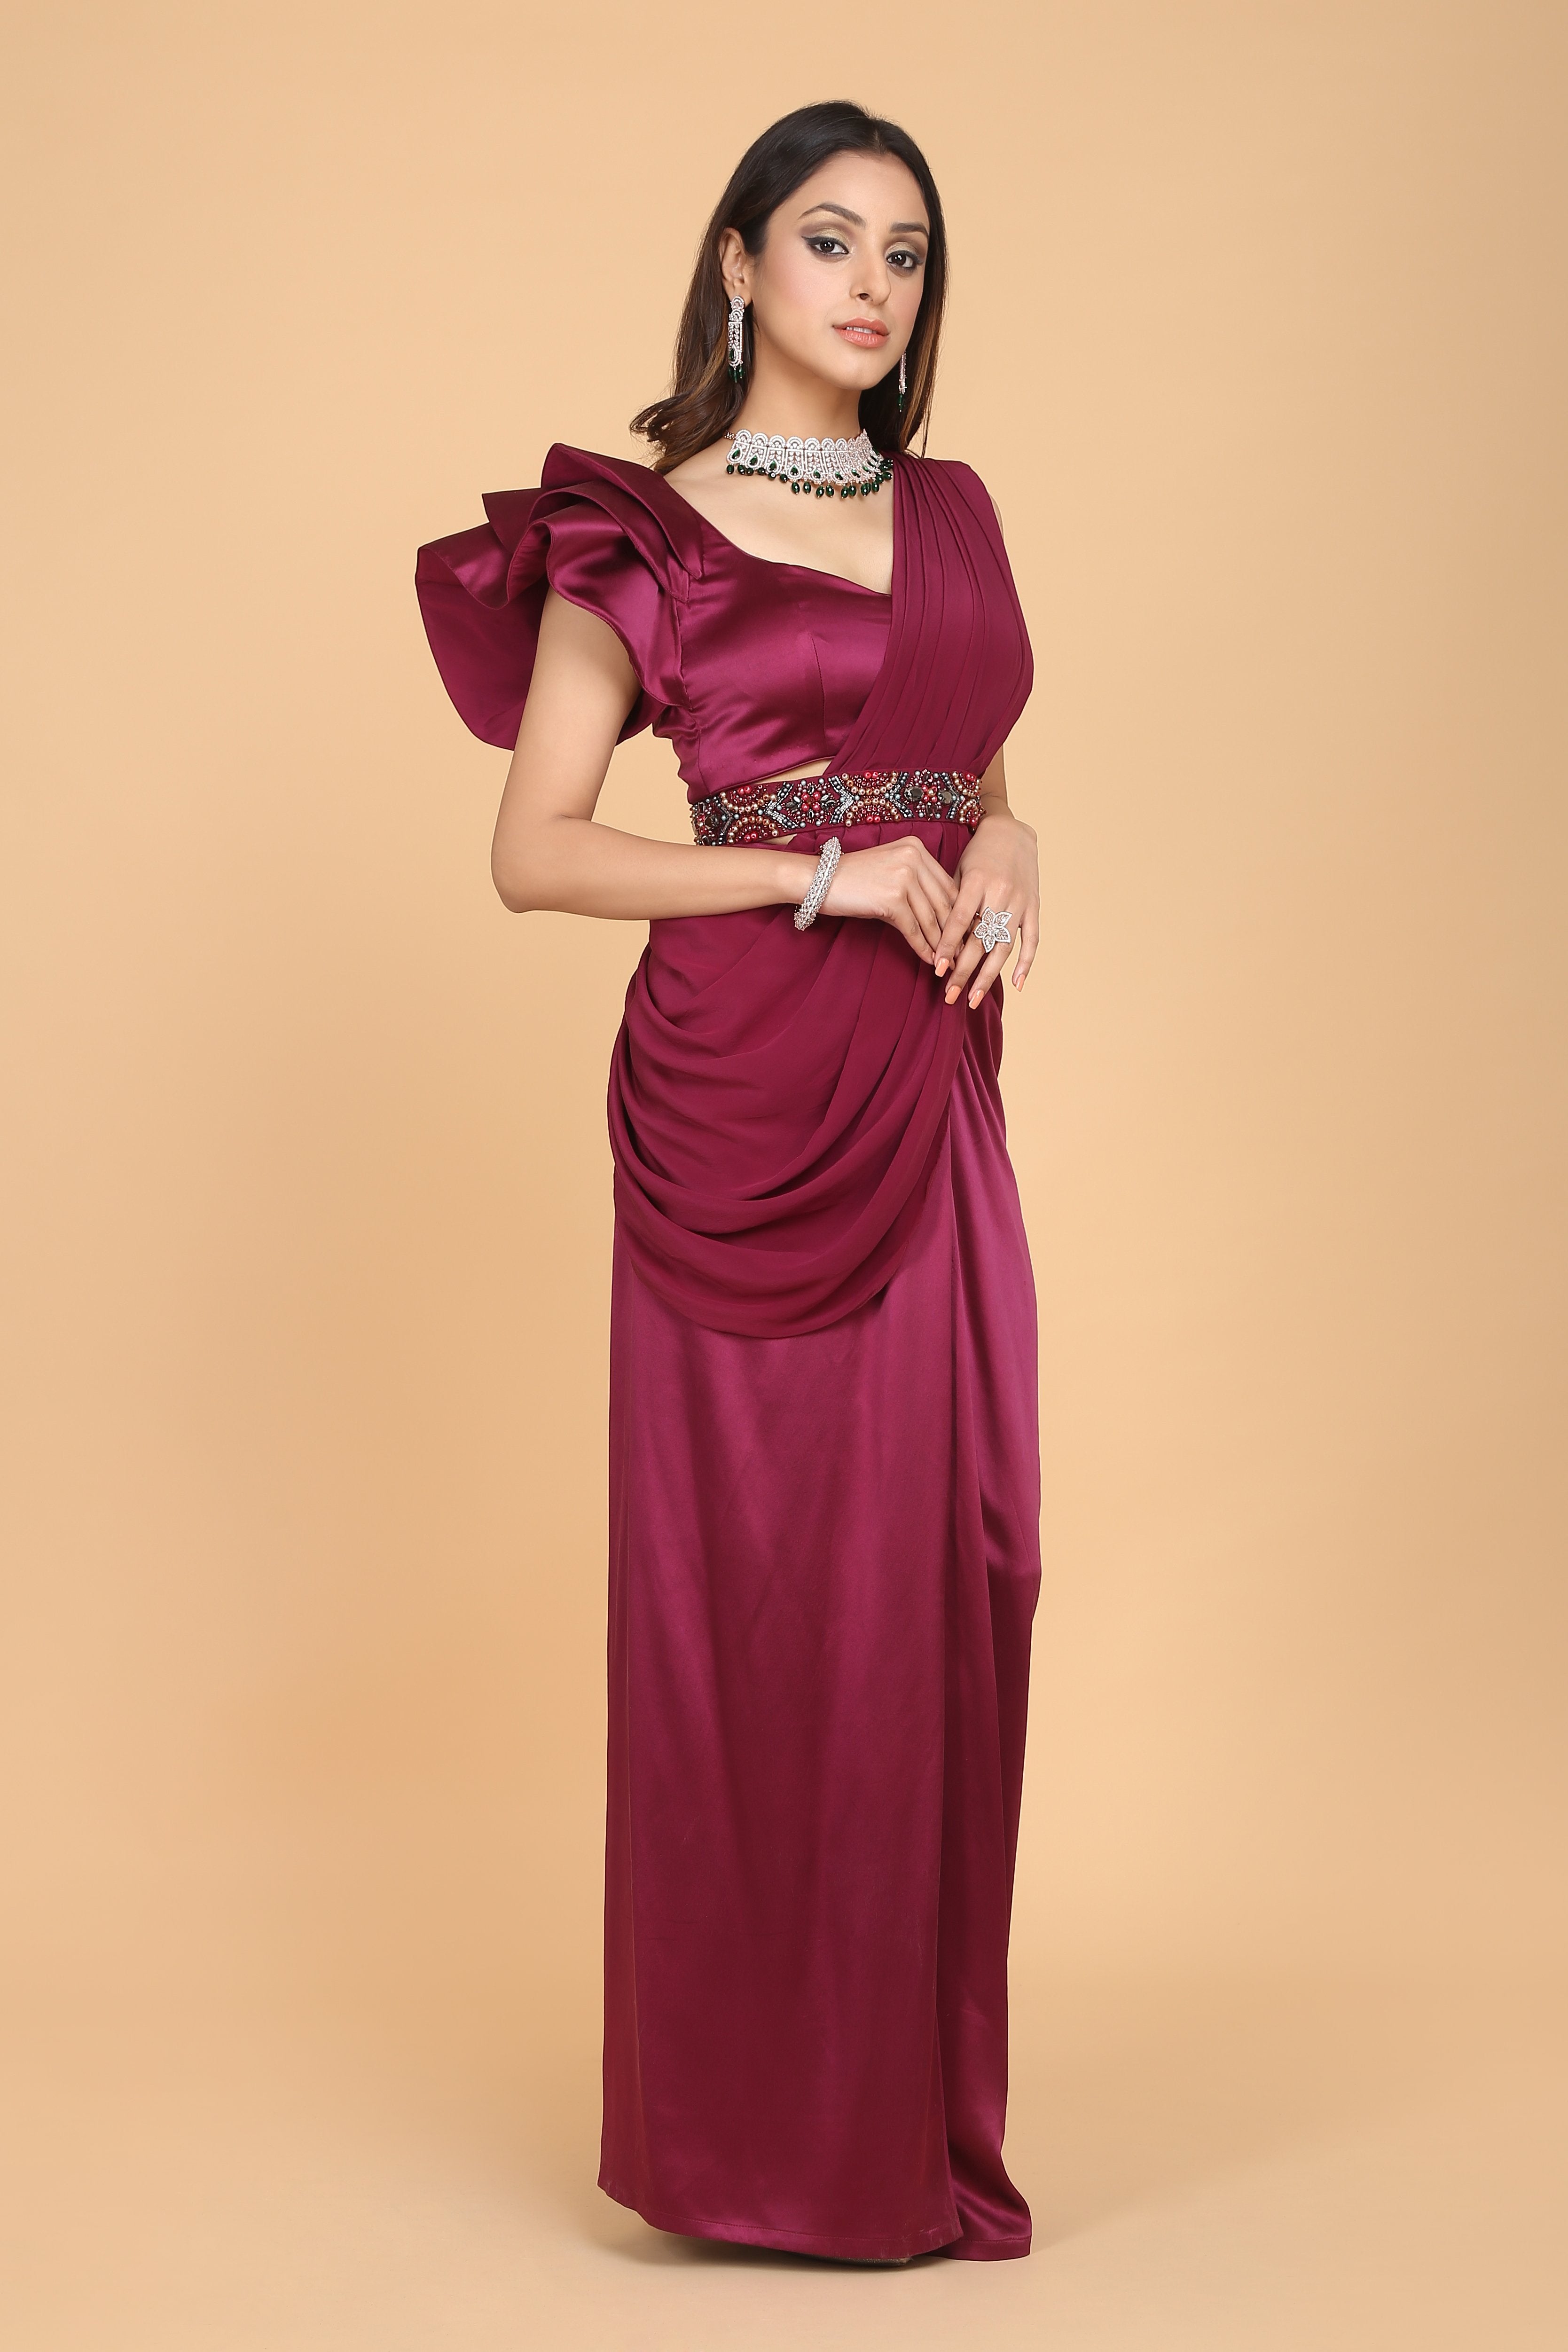 Amit GT - Pre-Draped Saree with Ruffle Blouse